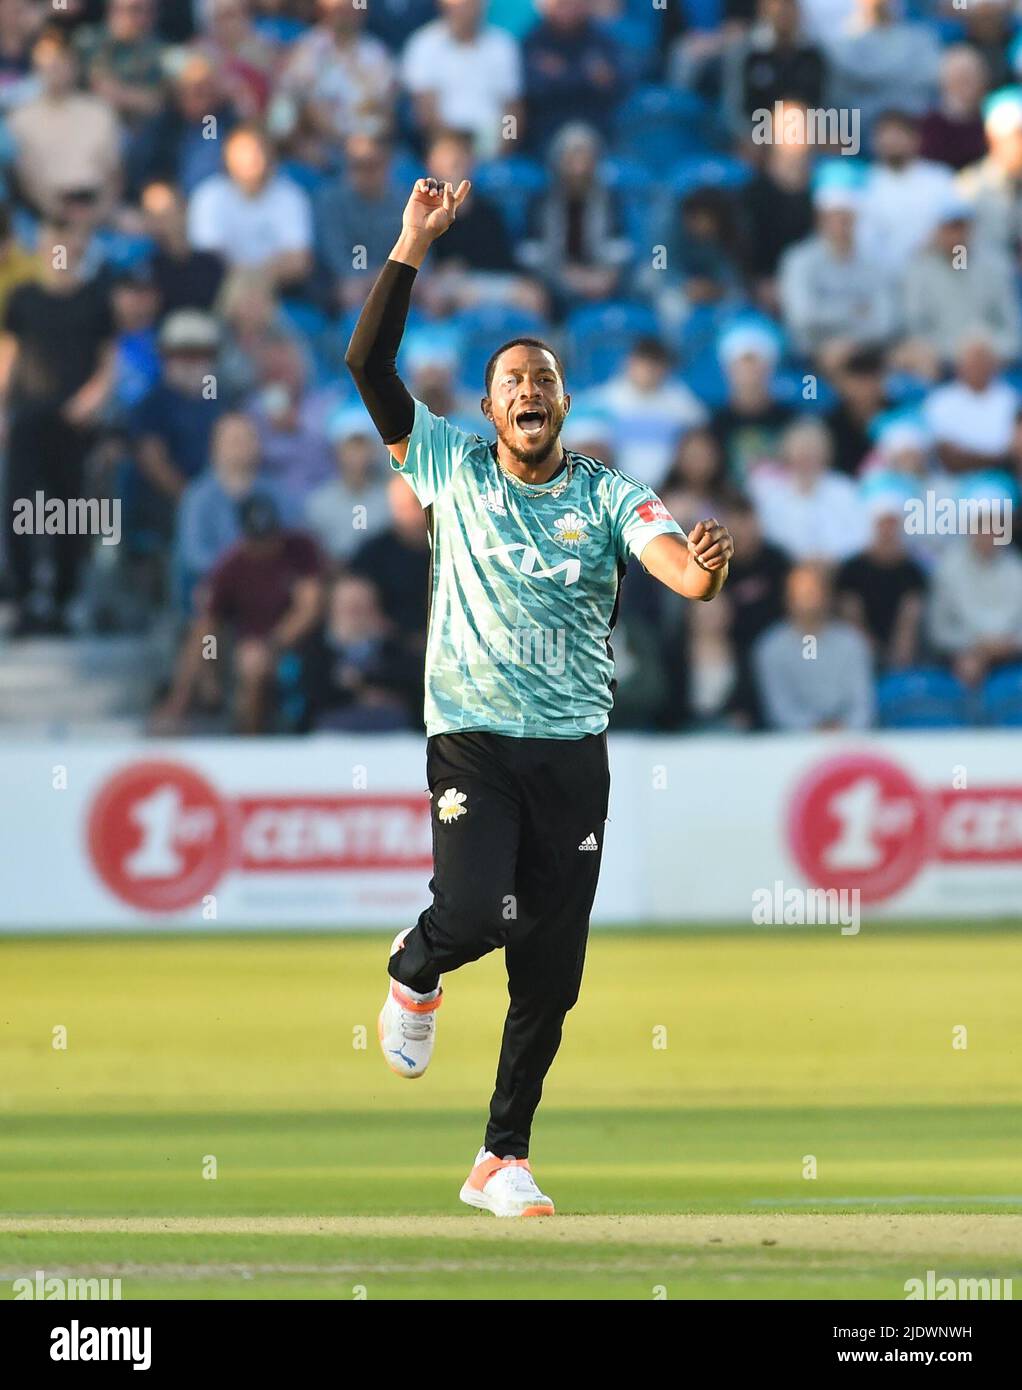 Hove UK 23rd June 2022 -  Chris Jordan the Surrey captain appeals unsuccessfully for a decision during the T20 Vitality Blast  match  between Sussex Sharks and Surrey at the 1st Central County Ground Hove . : Credit Simon Dack / Alamy Live News Stock Photo